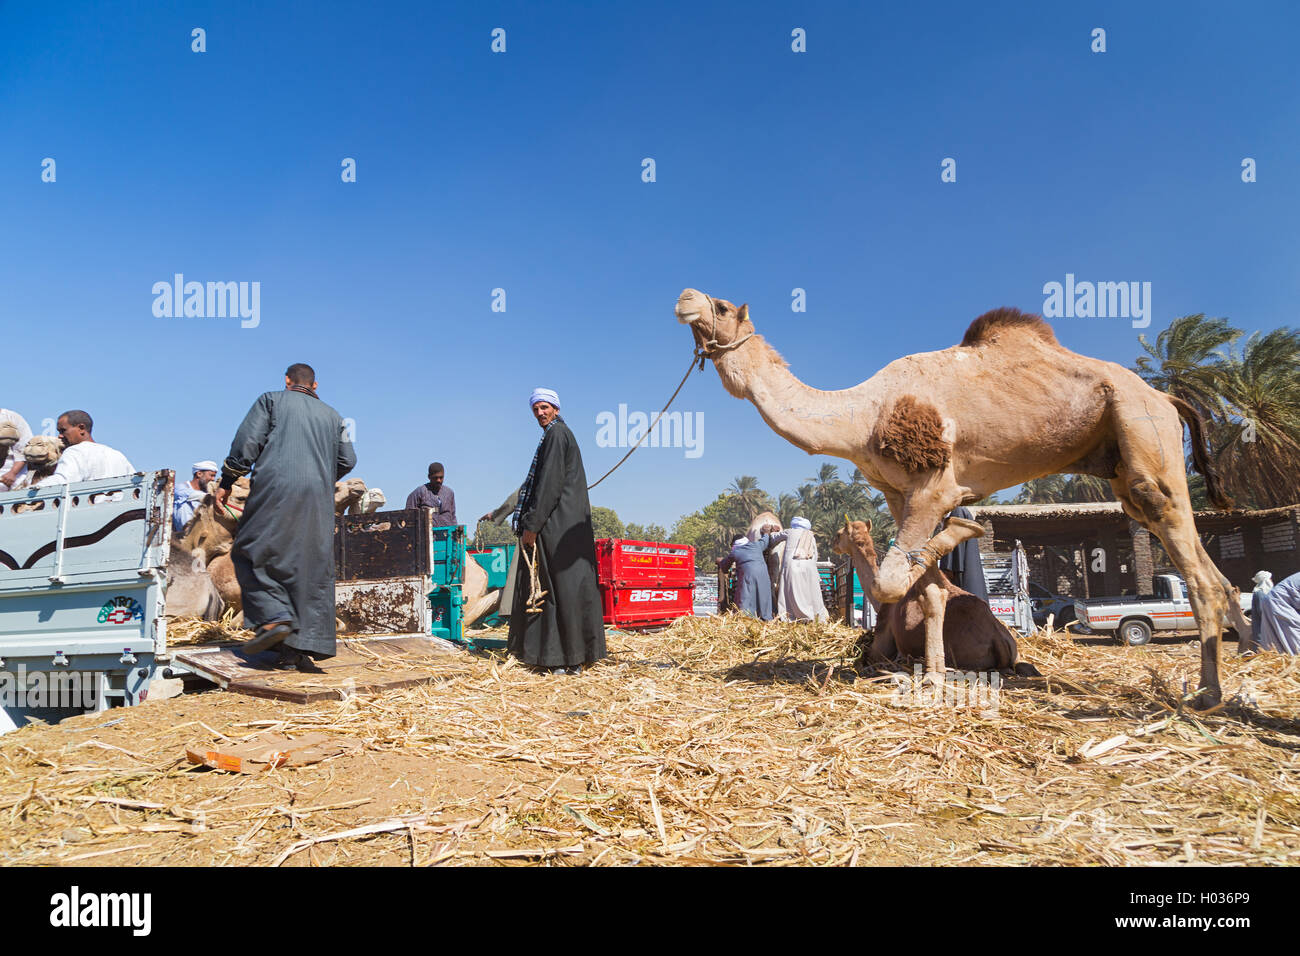 DARAW, EGYPT - FEBRUARY 6, 2016: Local camel salesmen on Camel market unloading camels from pick up trucks. Stock Photo